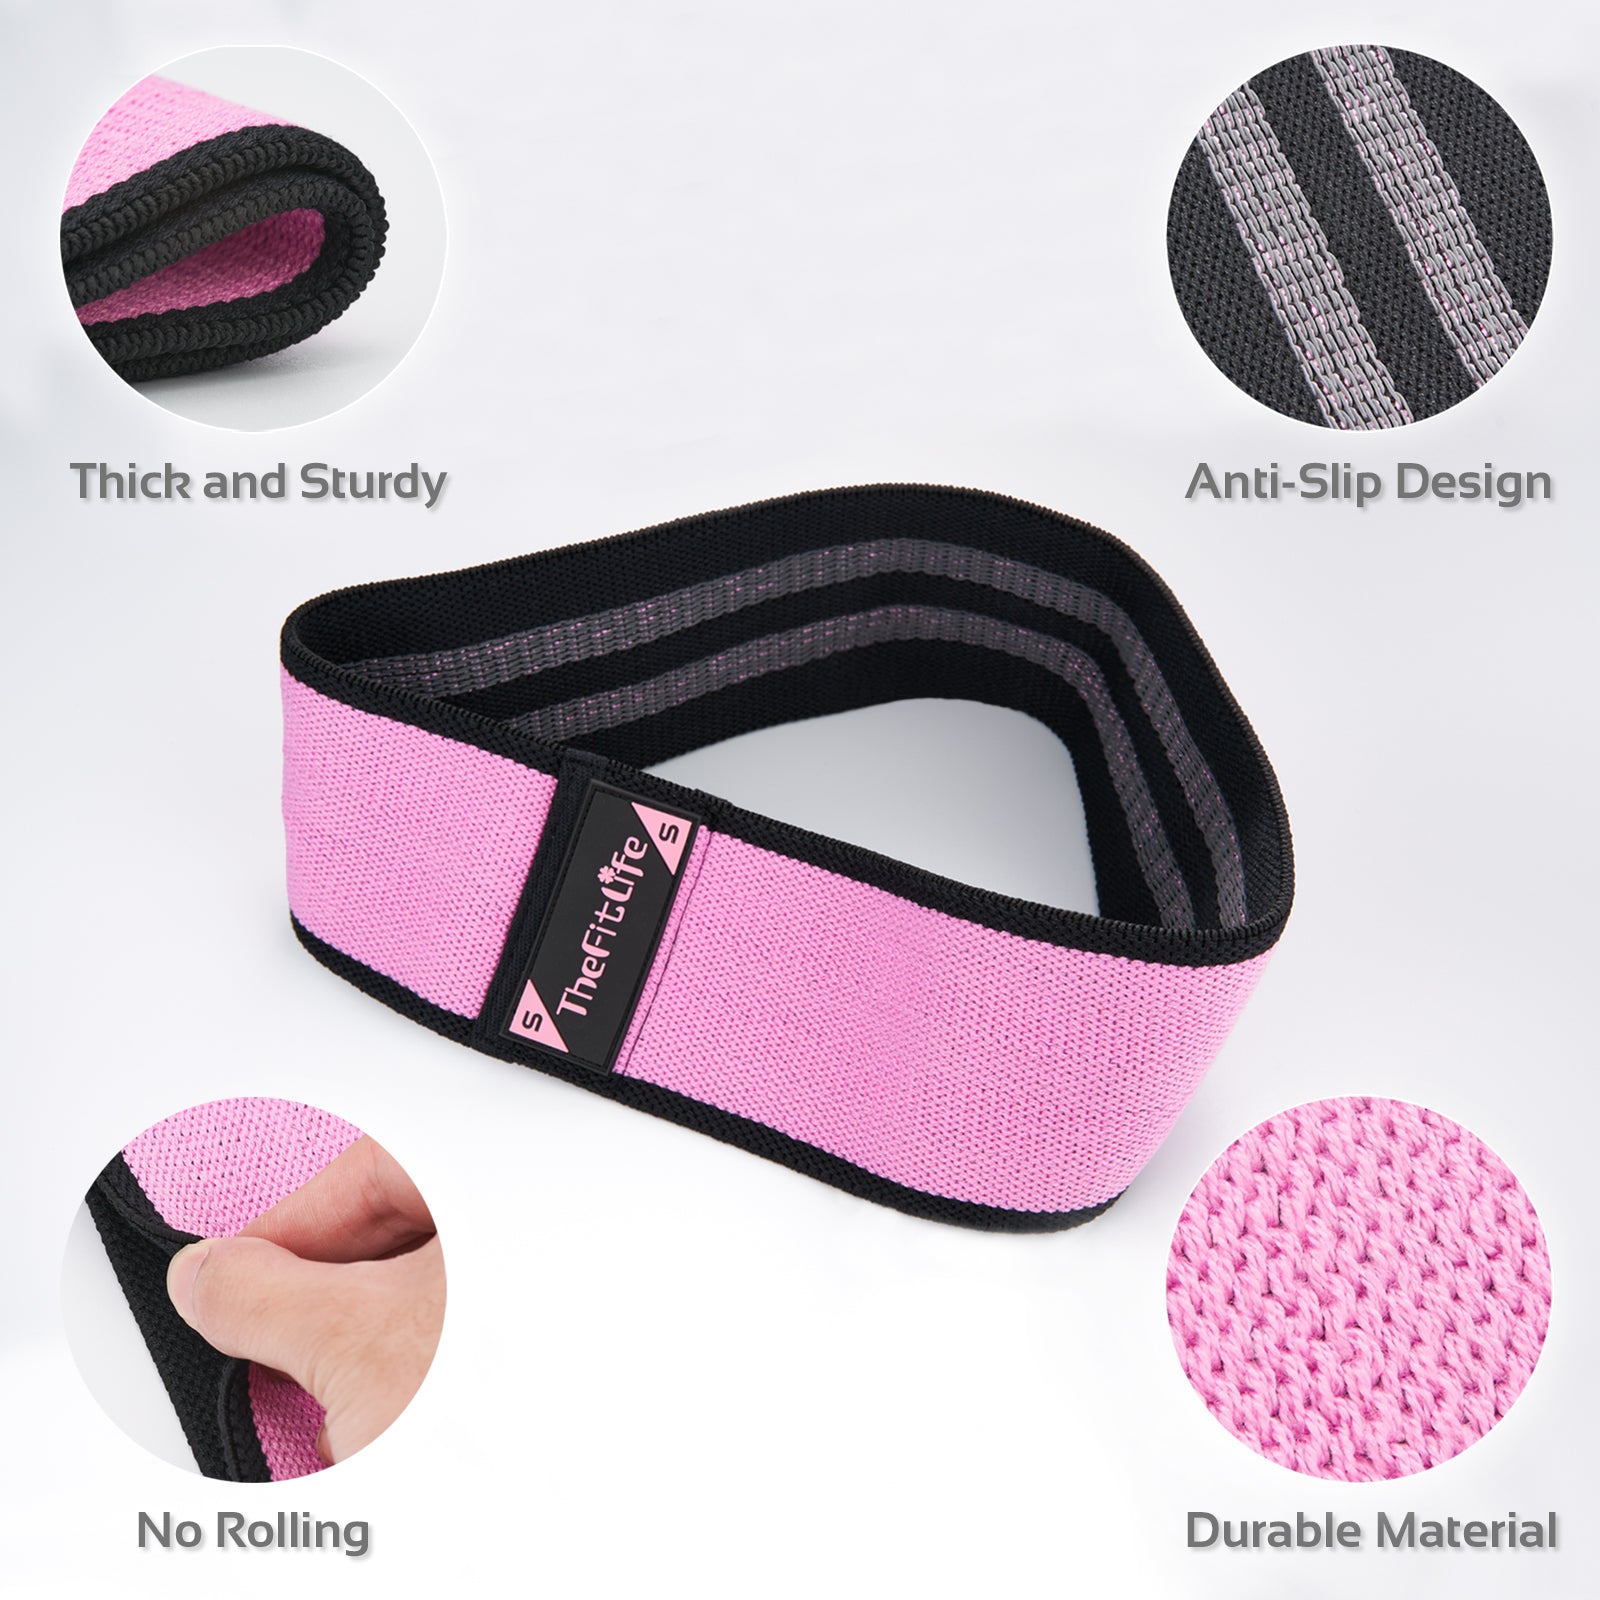 TheFitLife Resistance Bands for Legs and Butt - Cotton Mini Exercise B